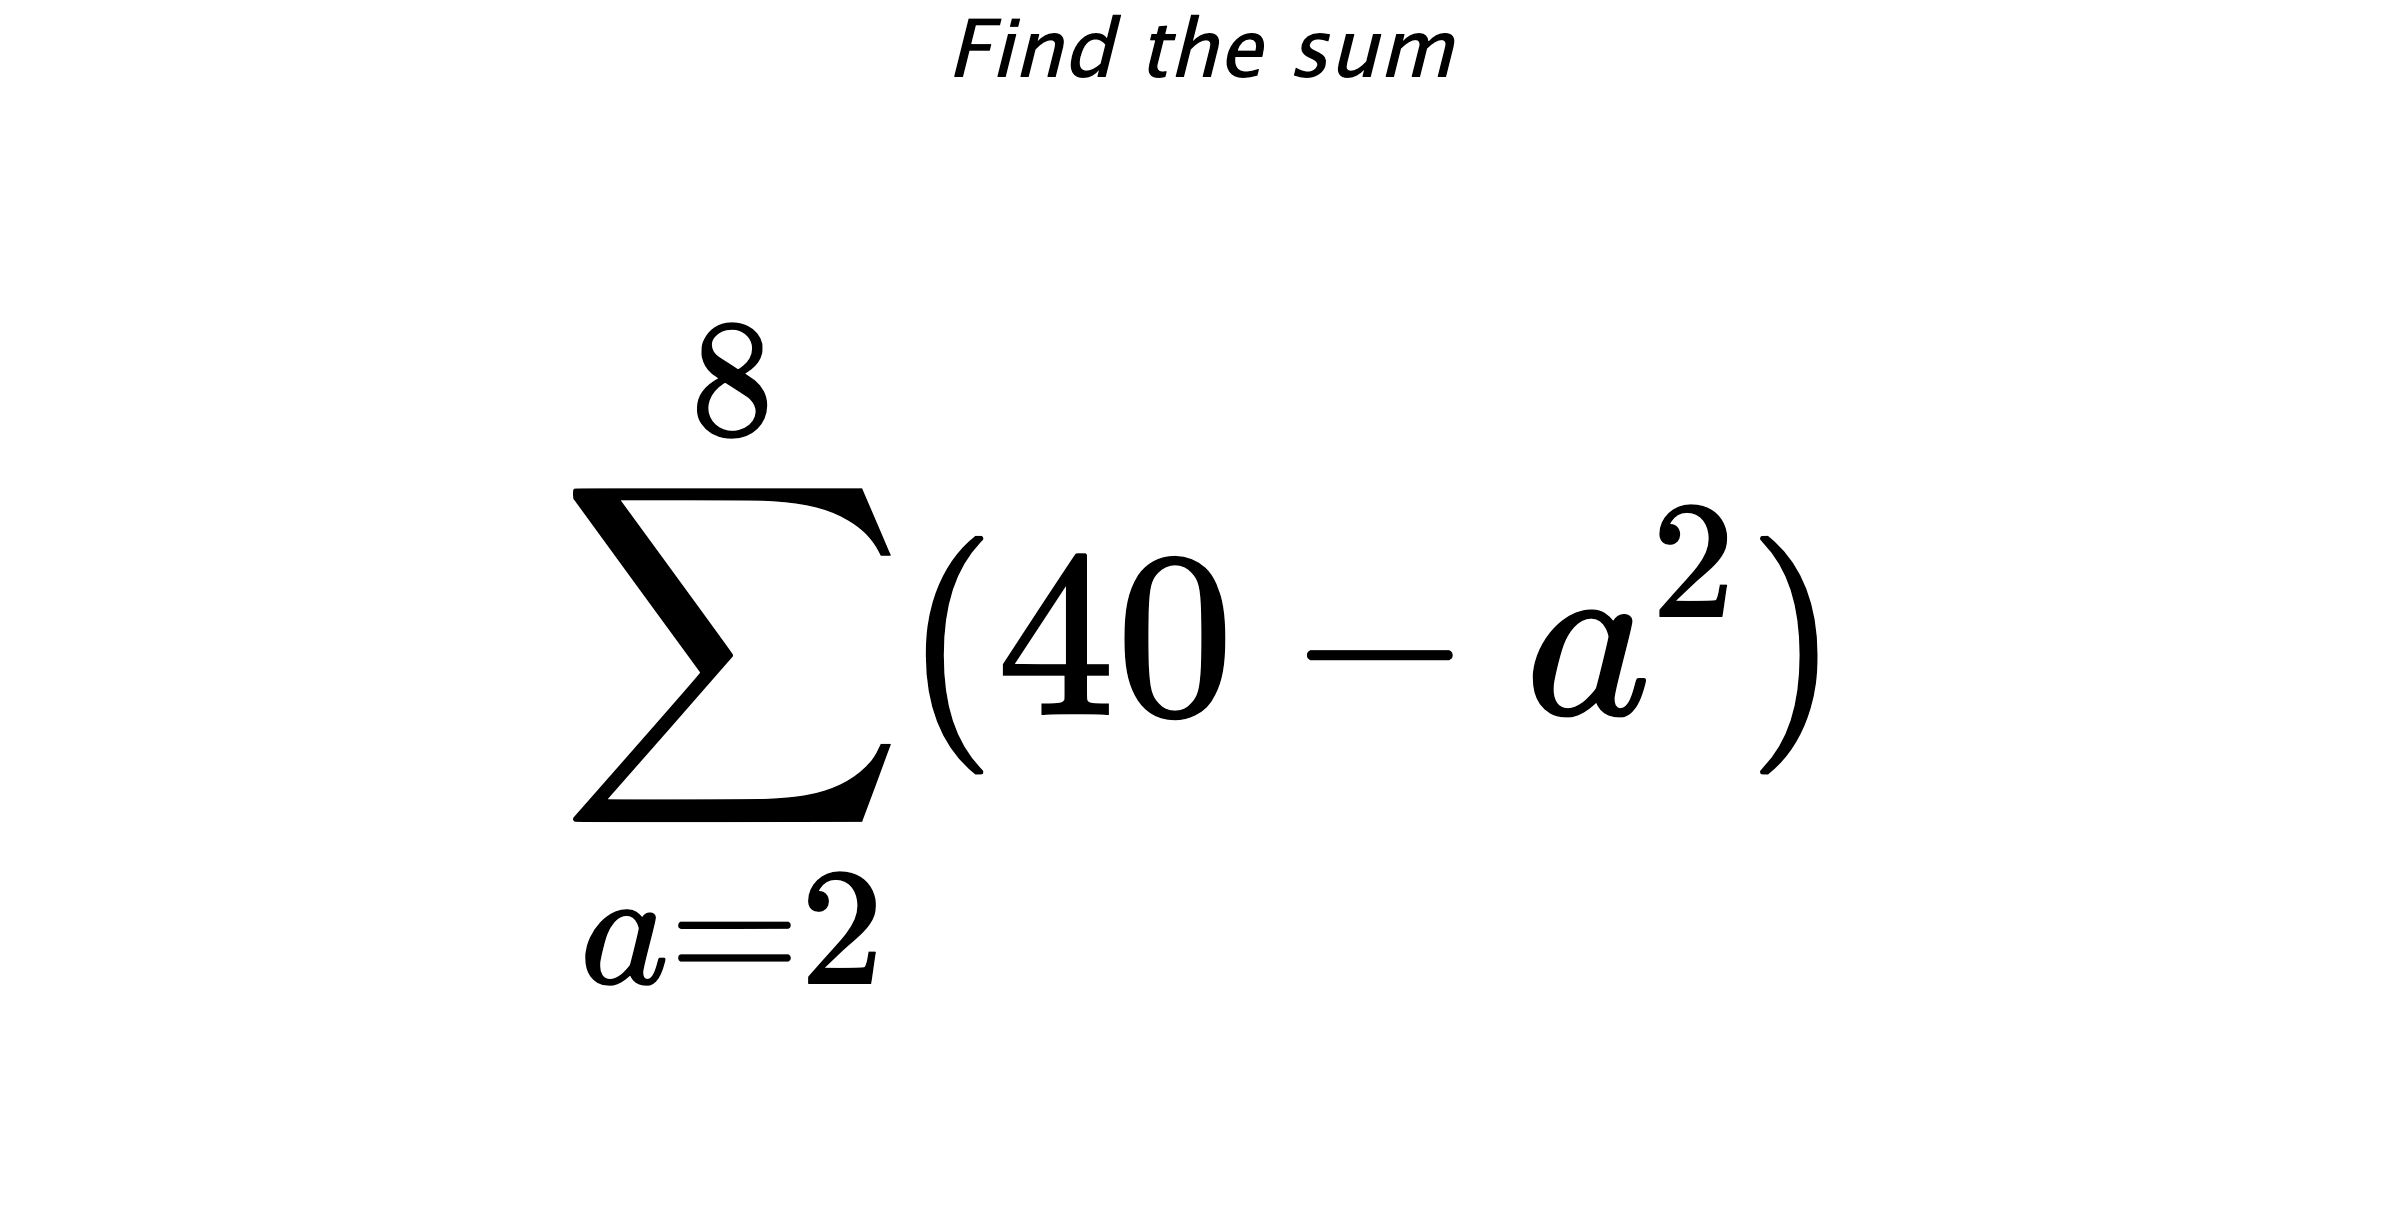 Find the sum $$ \sum_{a=2}^{8} (40-a^{2})$$